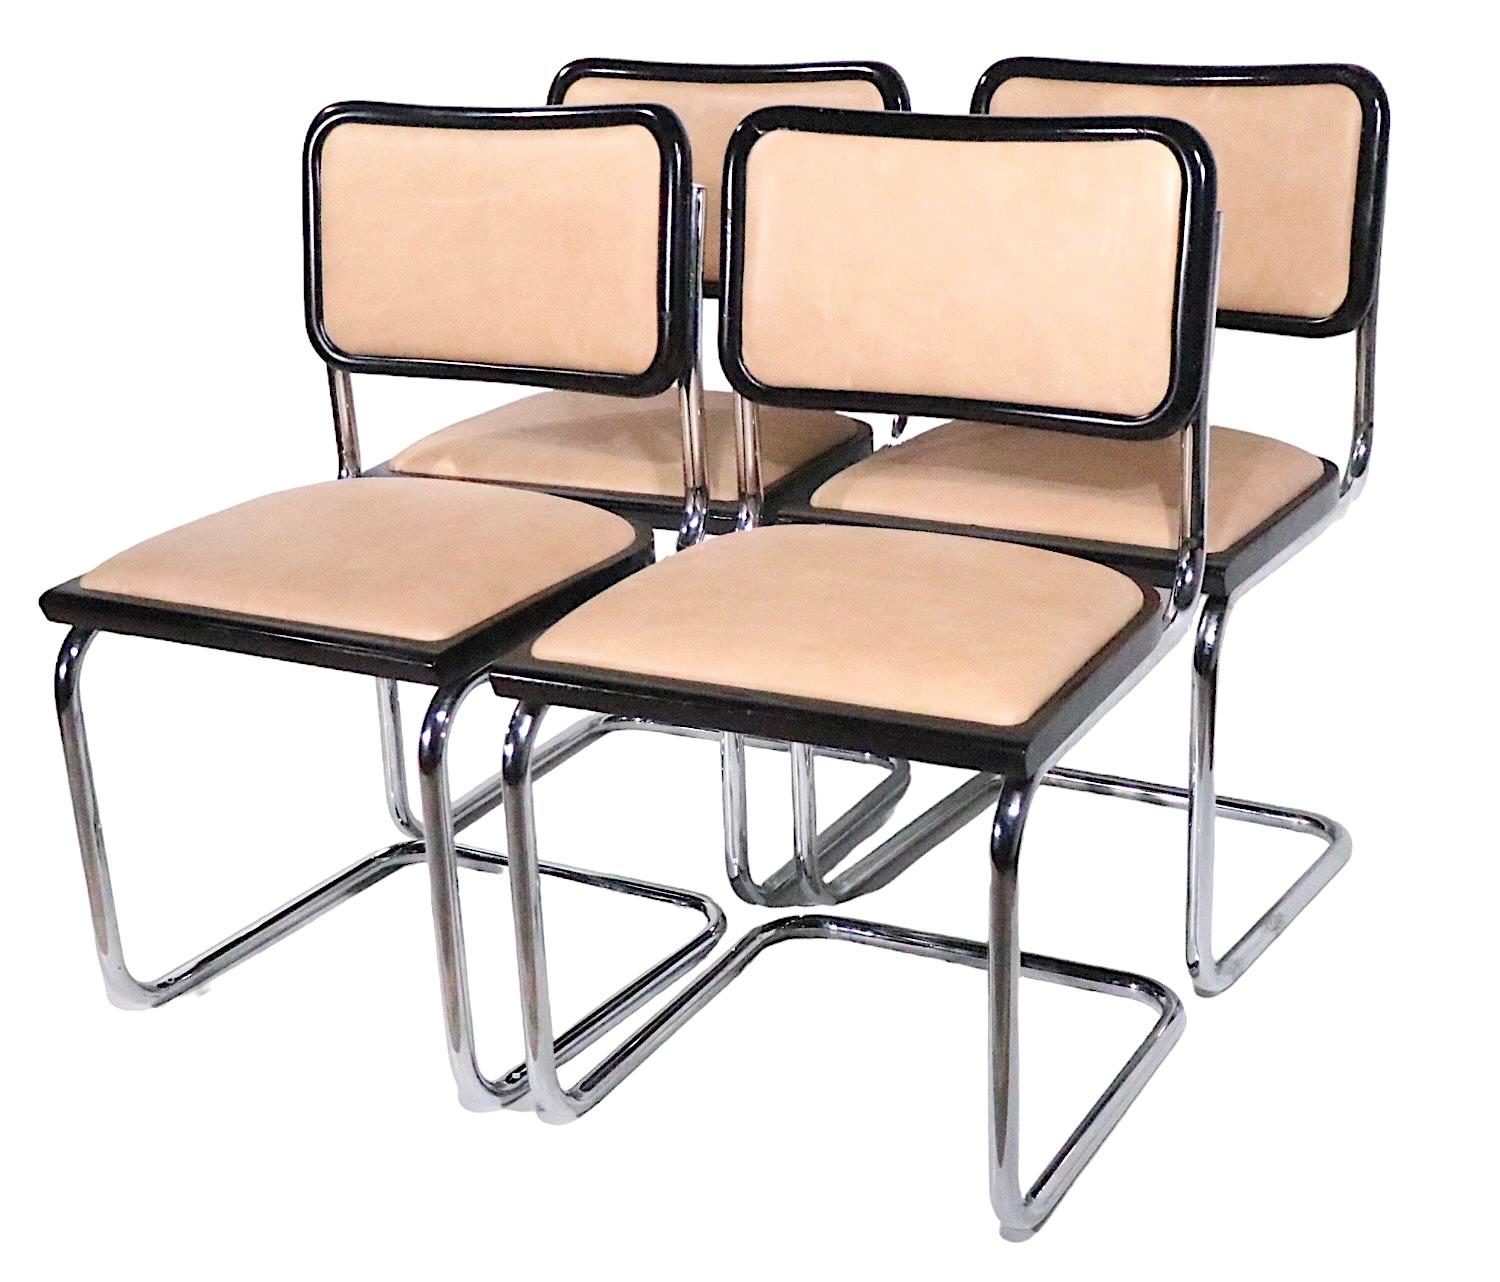 Set of Four Cesca Chairs Made in Italy Designed by Breuer c. 1970s For Sale 4